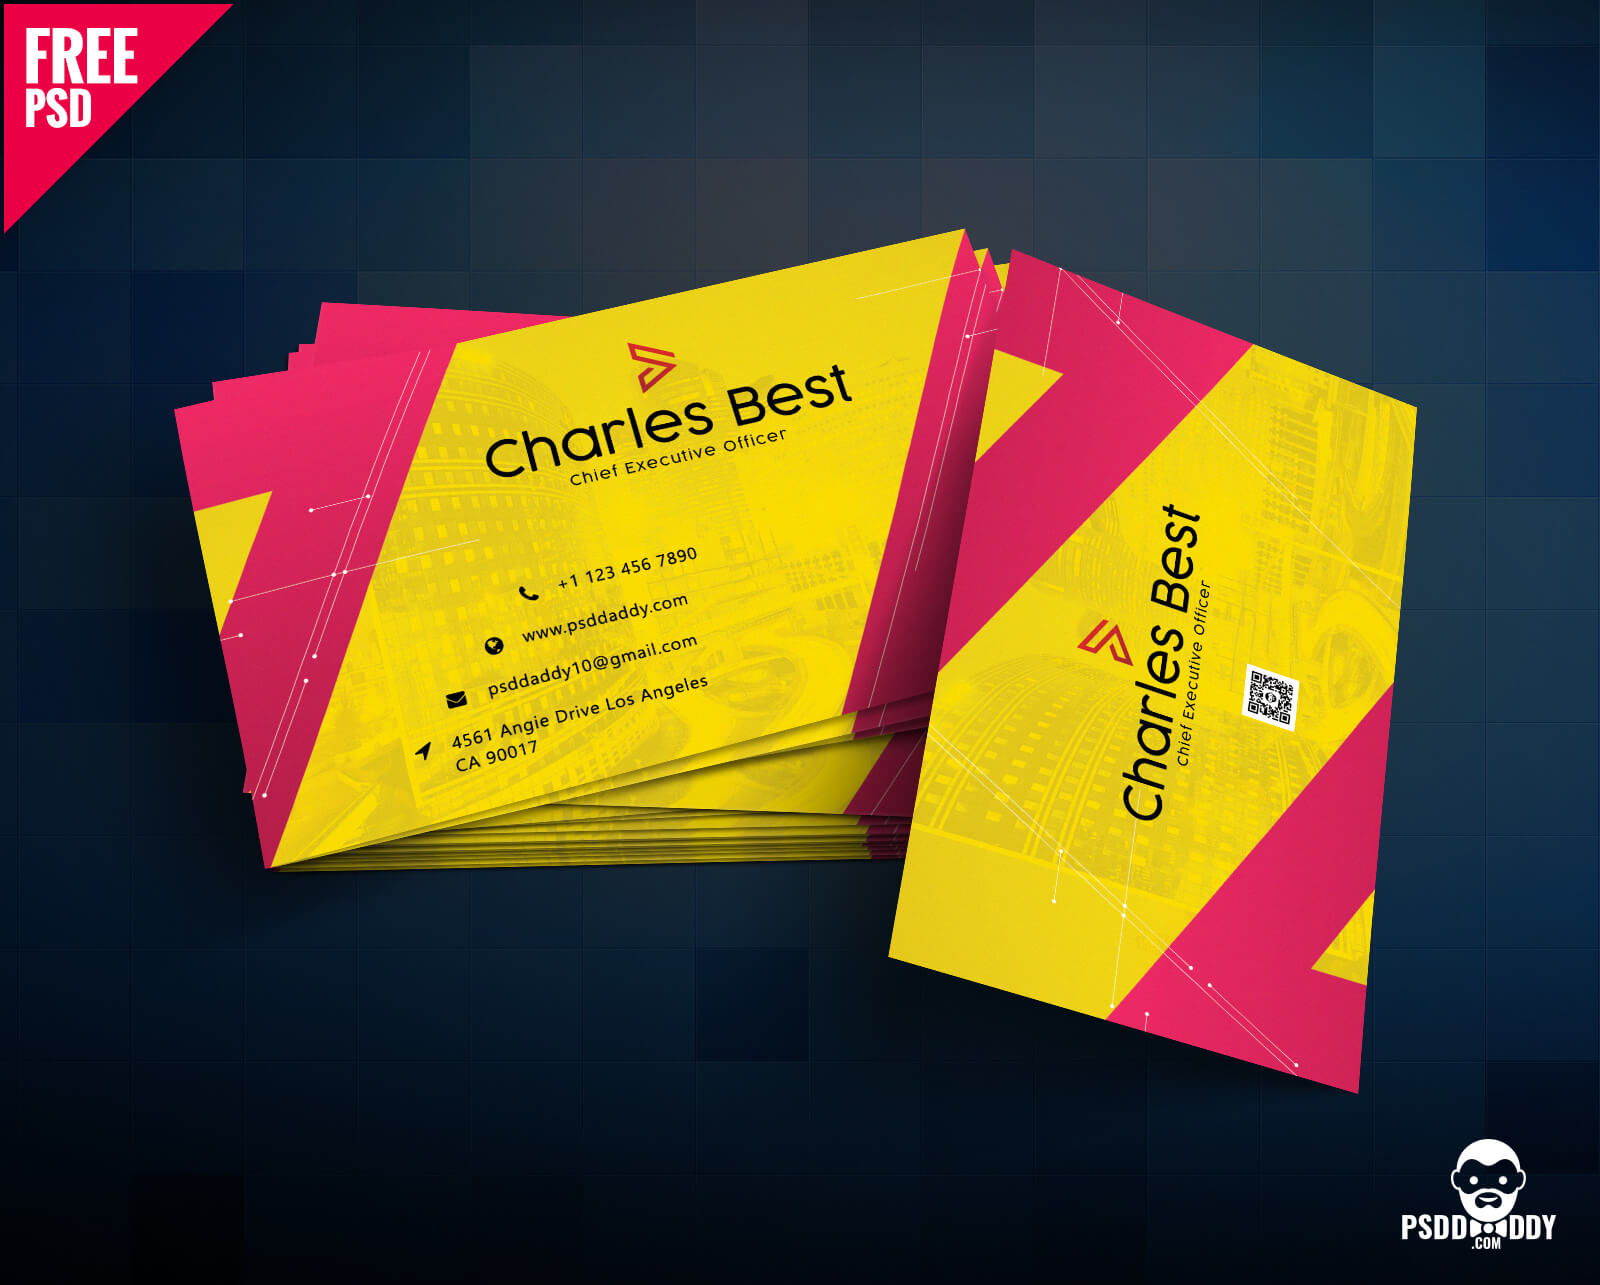 Download] Creative Business Card Free Psd | Psddaddy Inside Name Card Template Psd Free Download